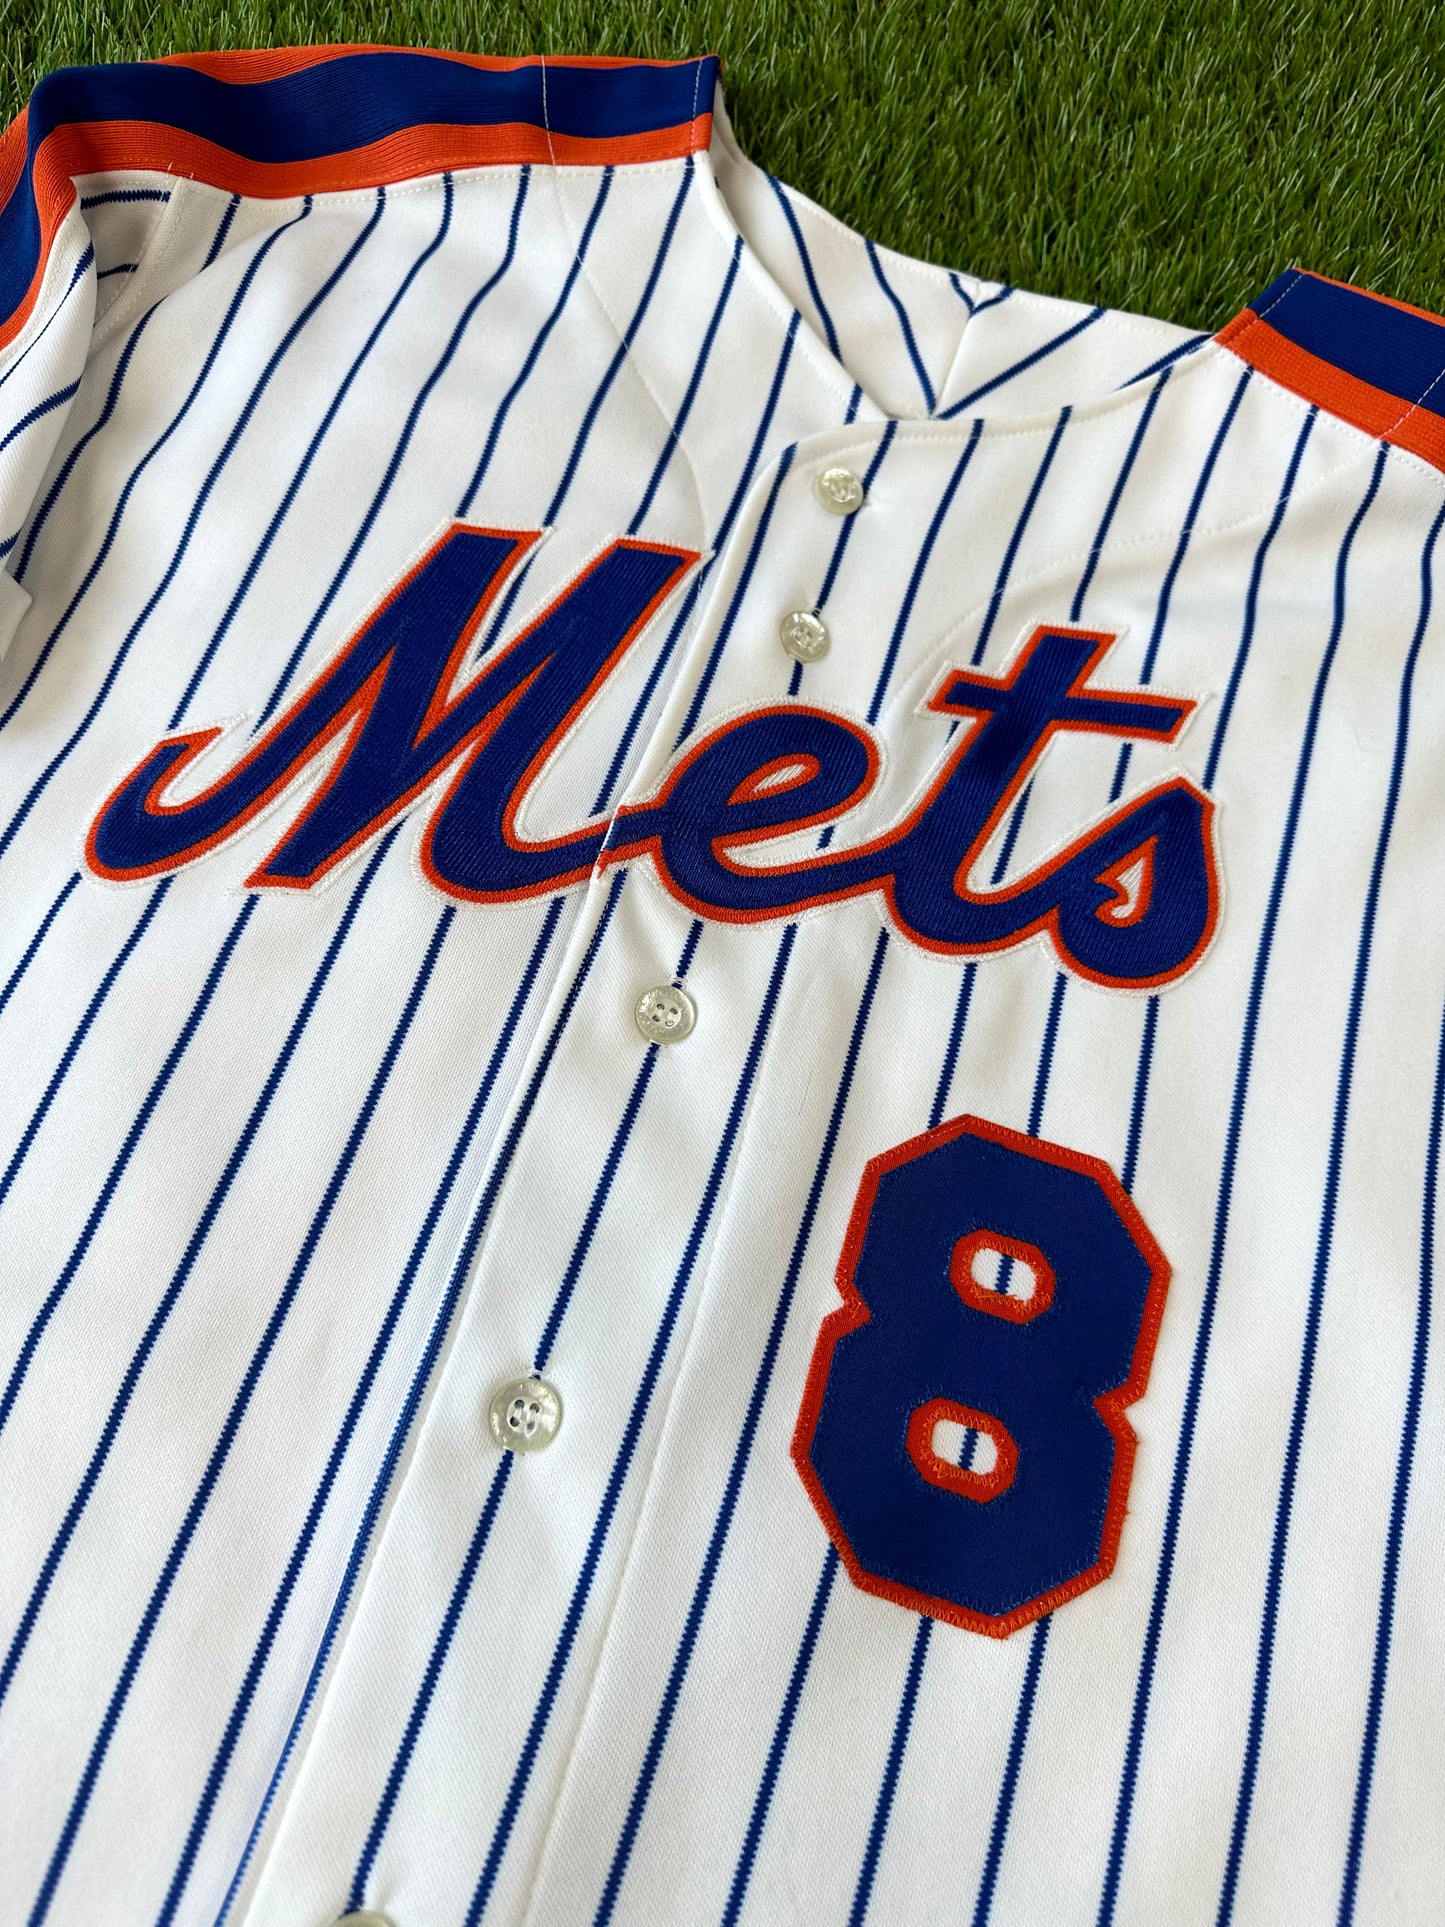 100% Authentic Mitchell & Ness 1986 New York Mets GARY CARTER Jersey Sz  44 L